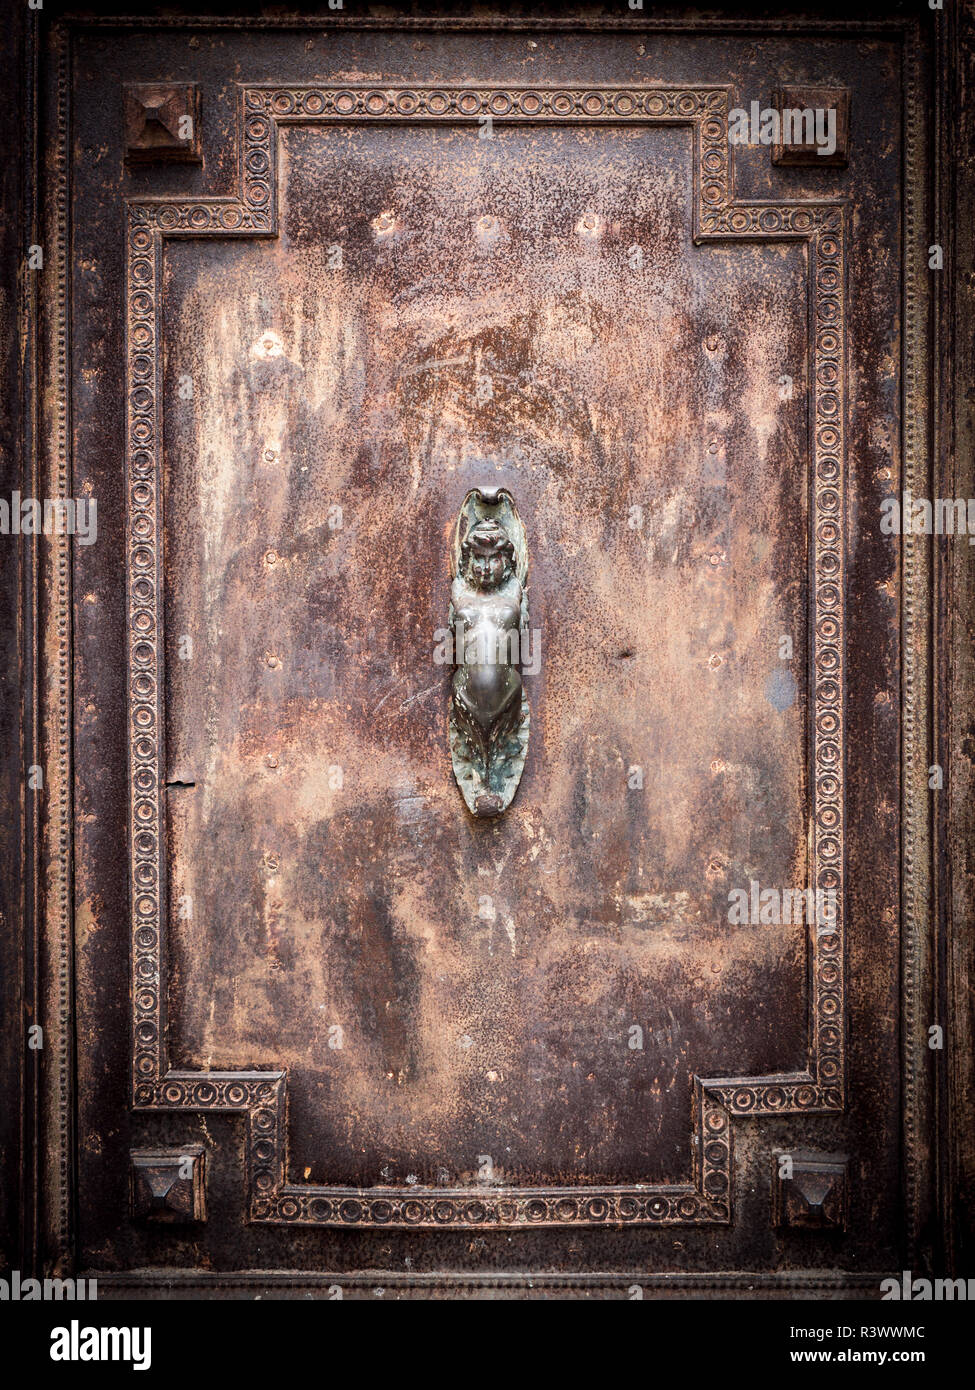 Mermaid-shaped handle of an ancient portal of an old building. Stock Photo